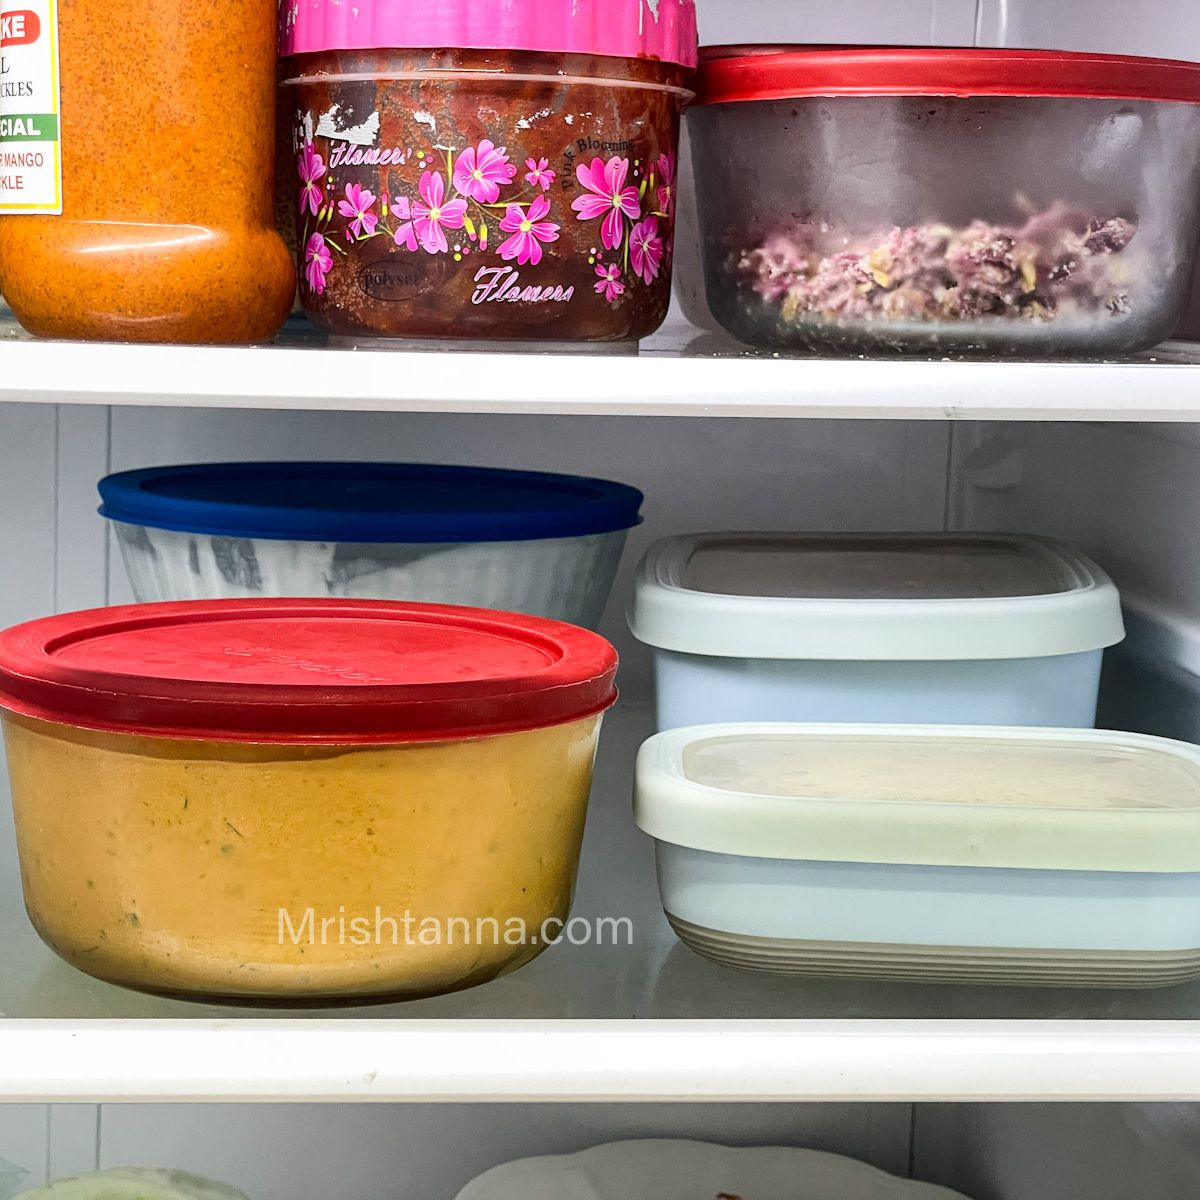 Containers filled with curries and placed inside the fridge.